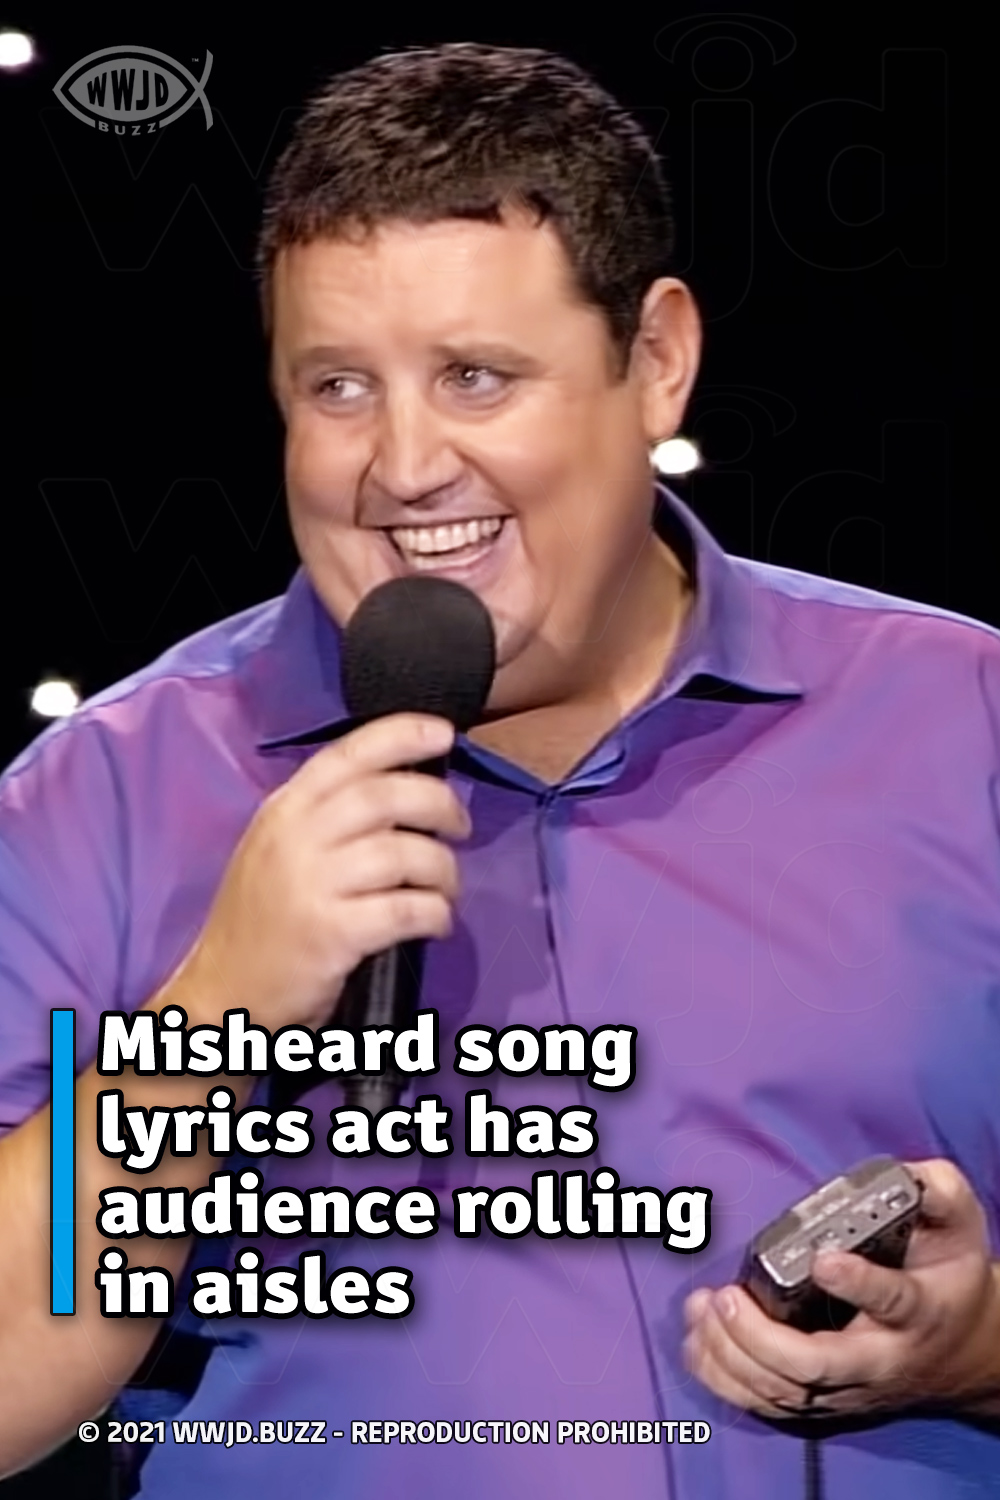 Misheard song lyrics act has audience rolling in aisles